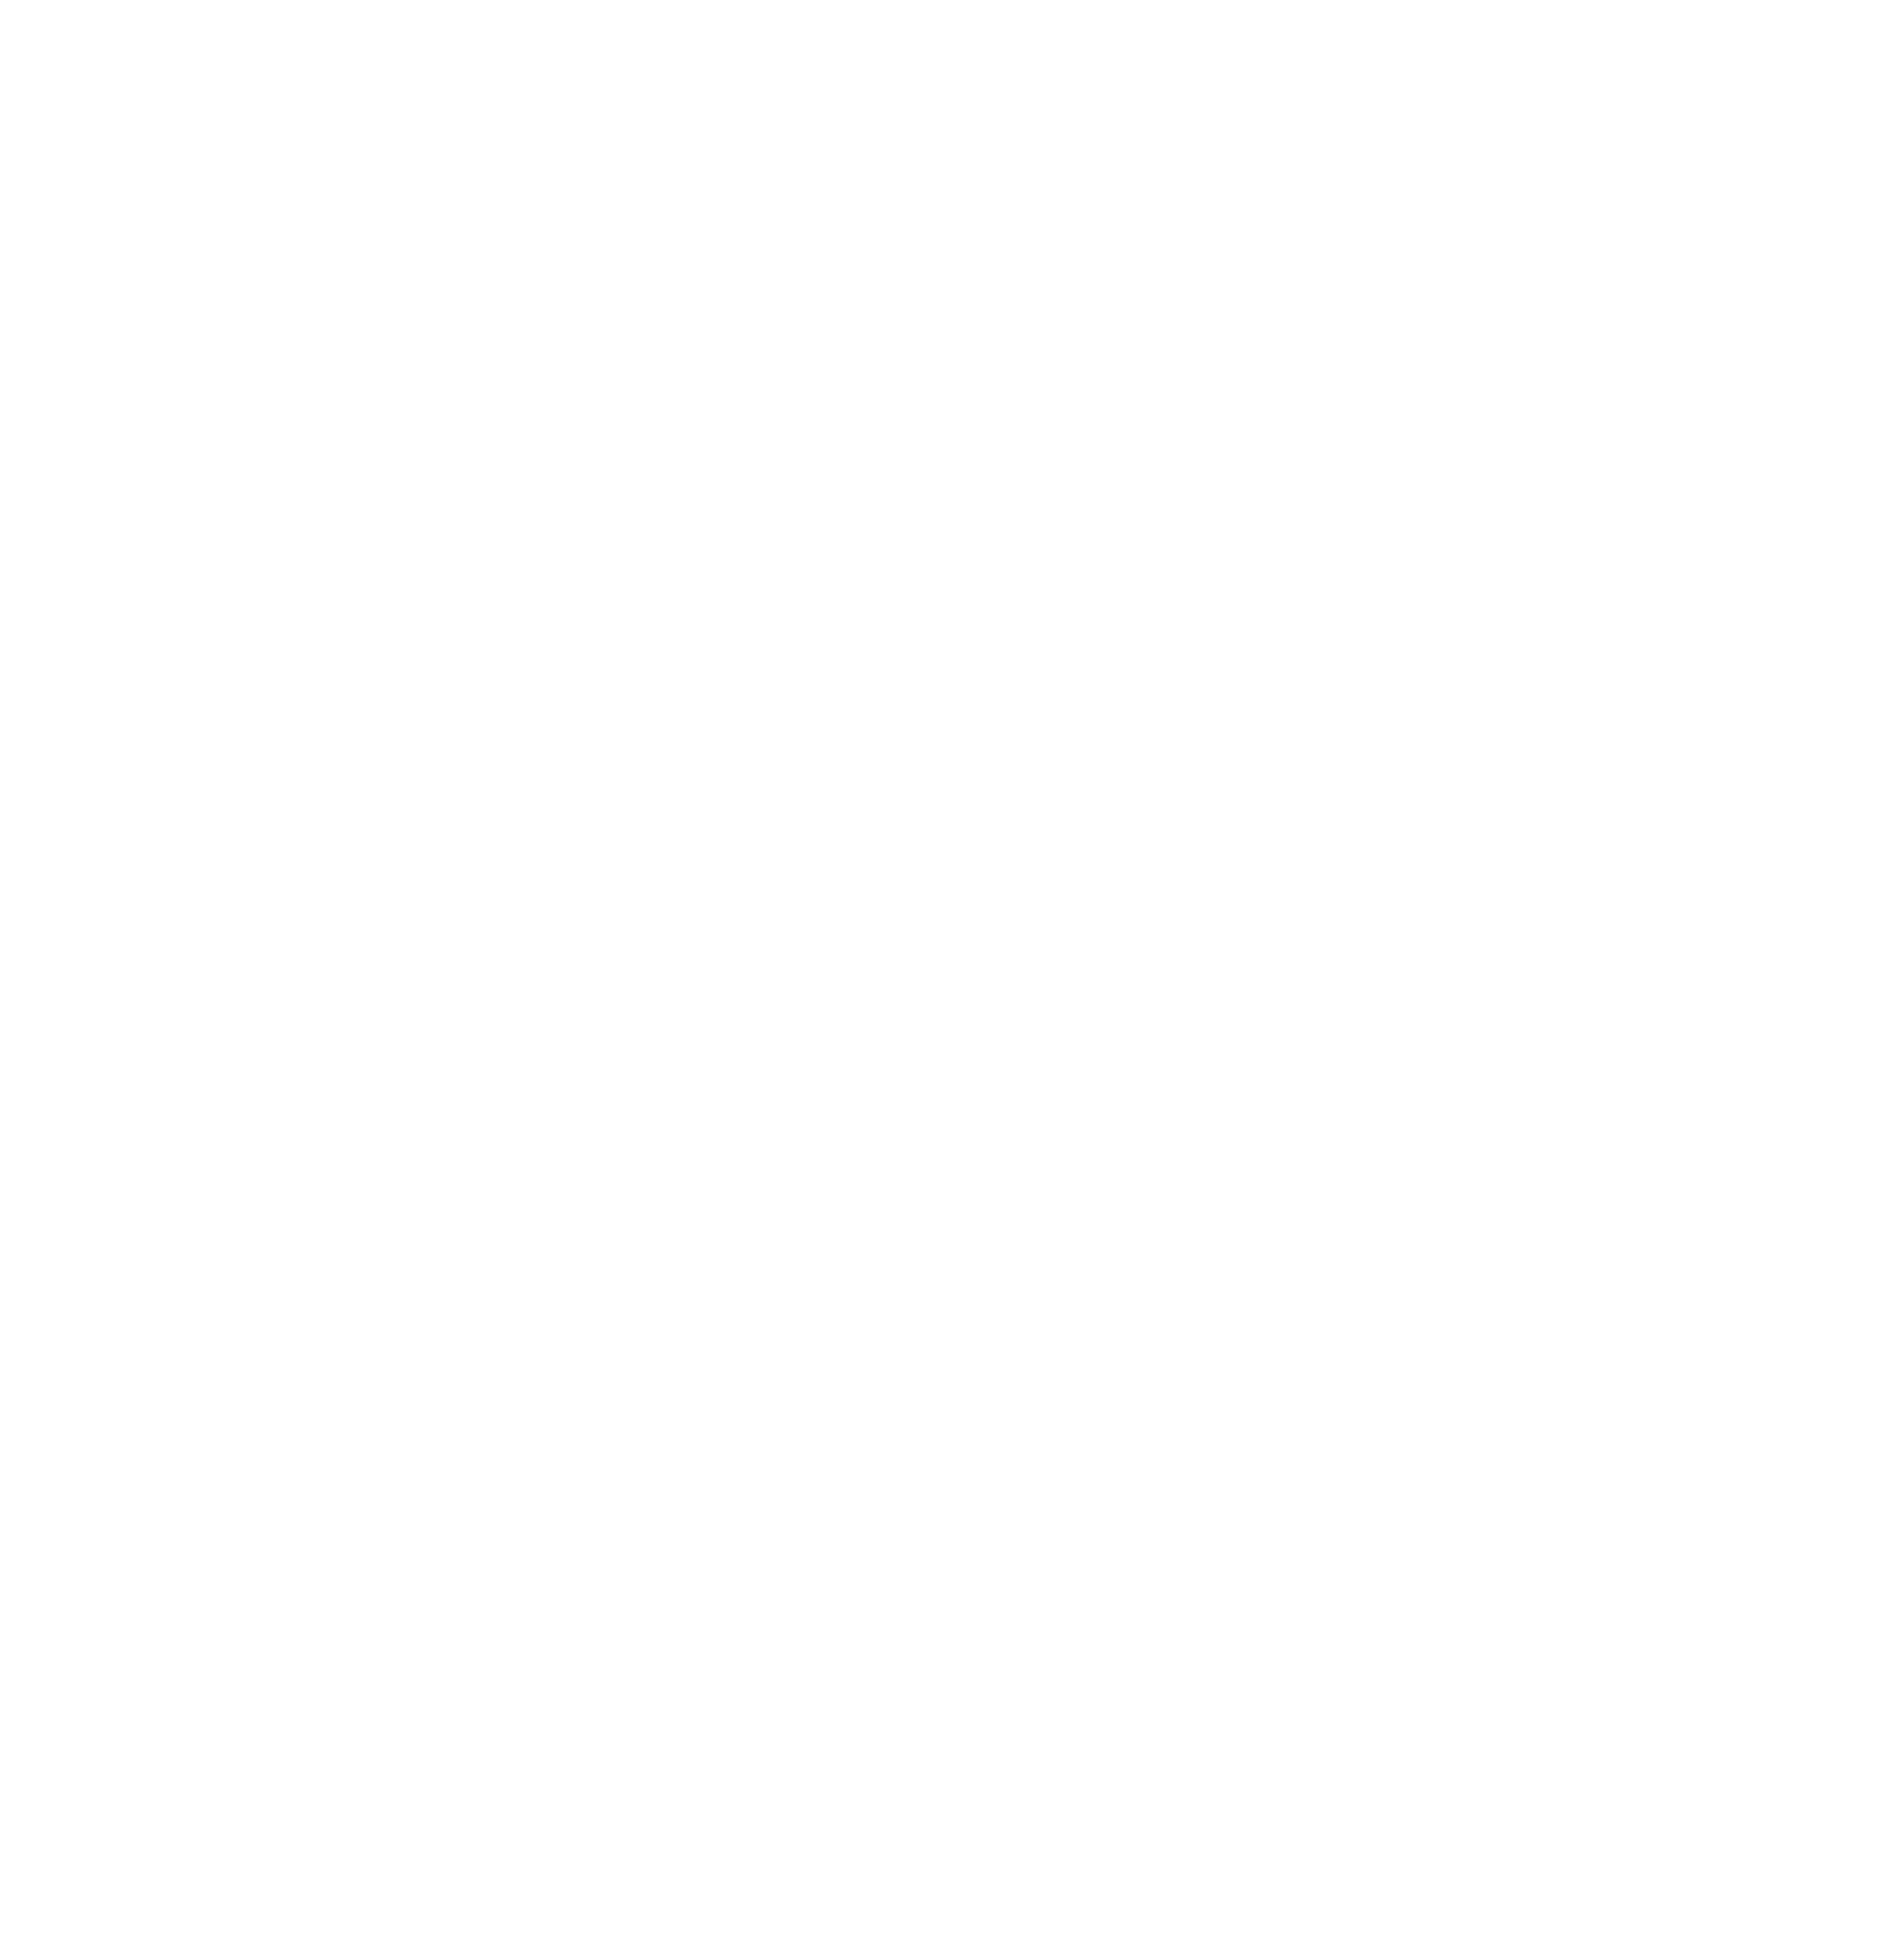 Do your washing at night to save with off - peak times